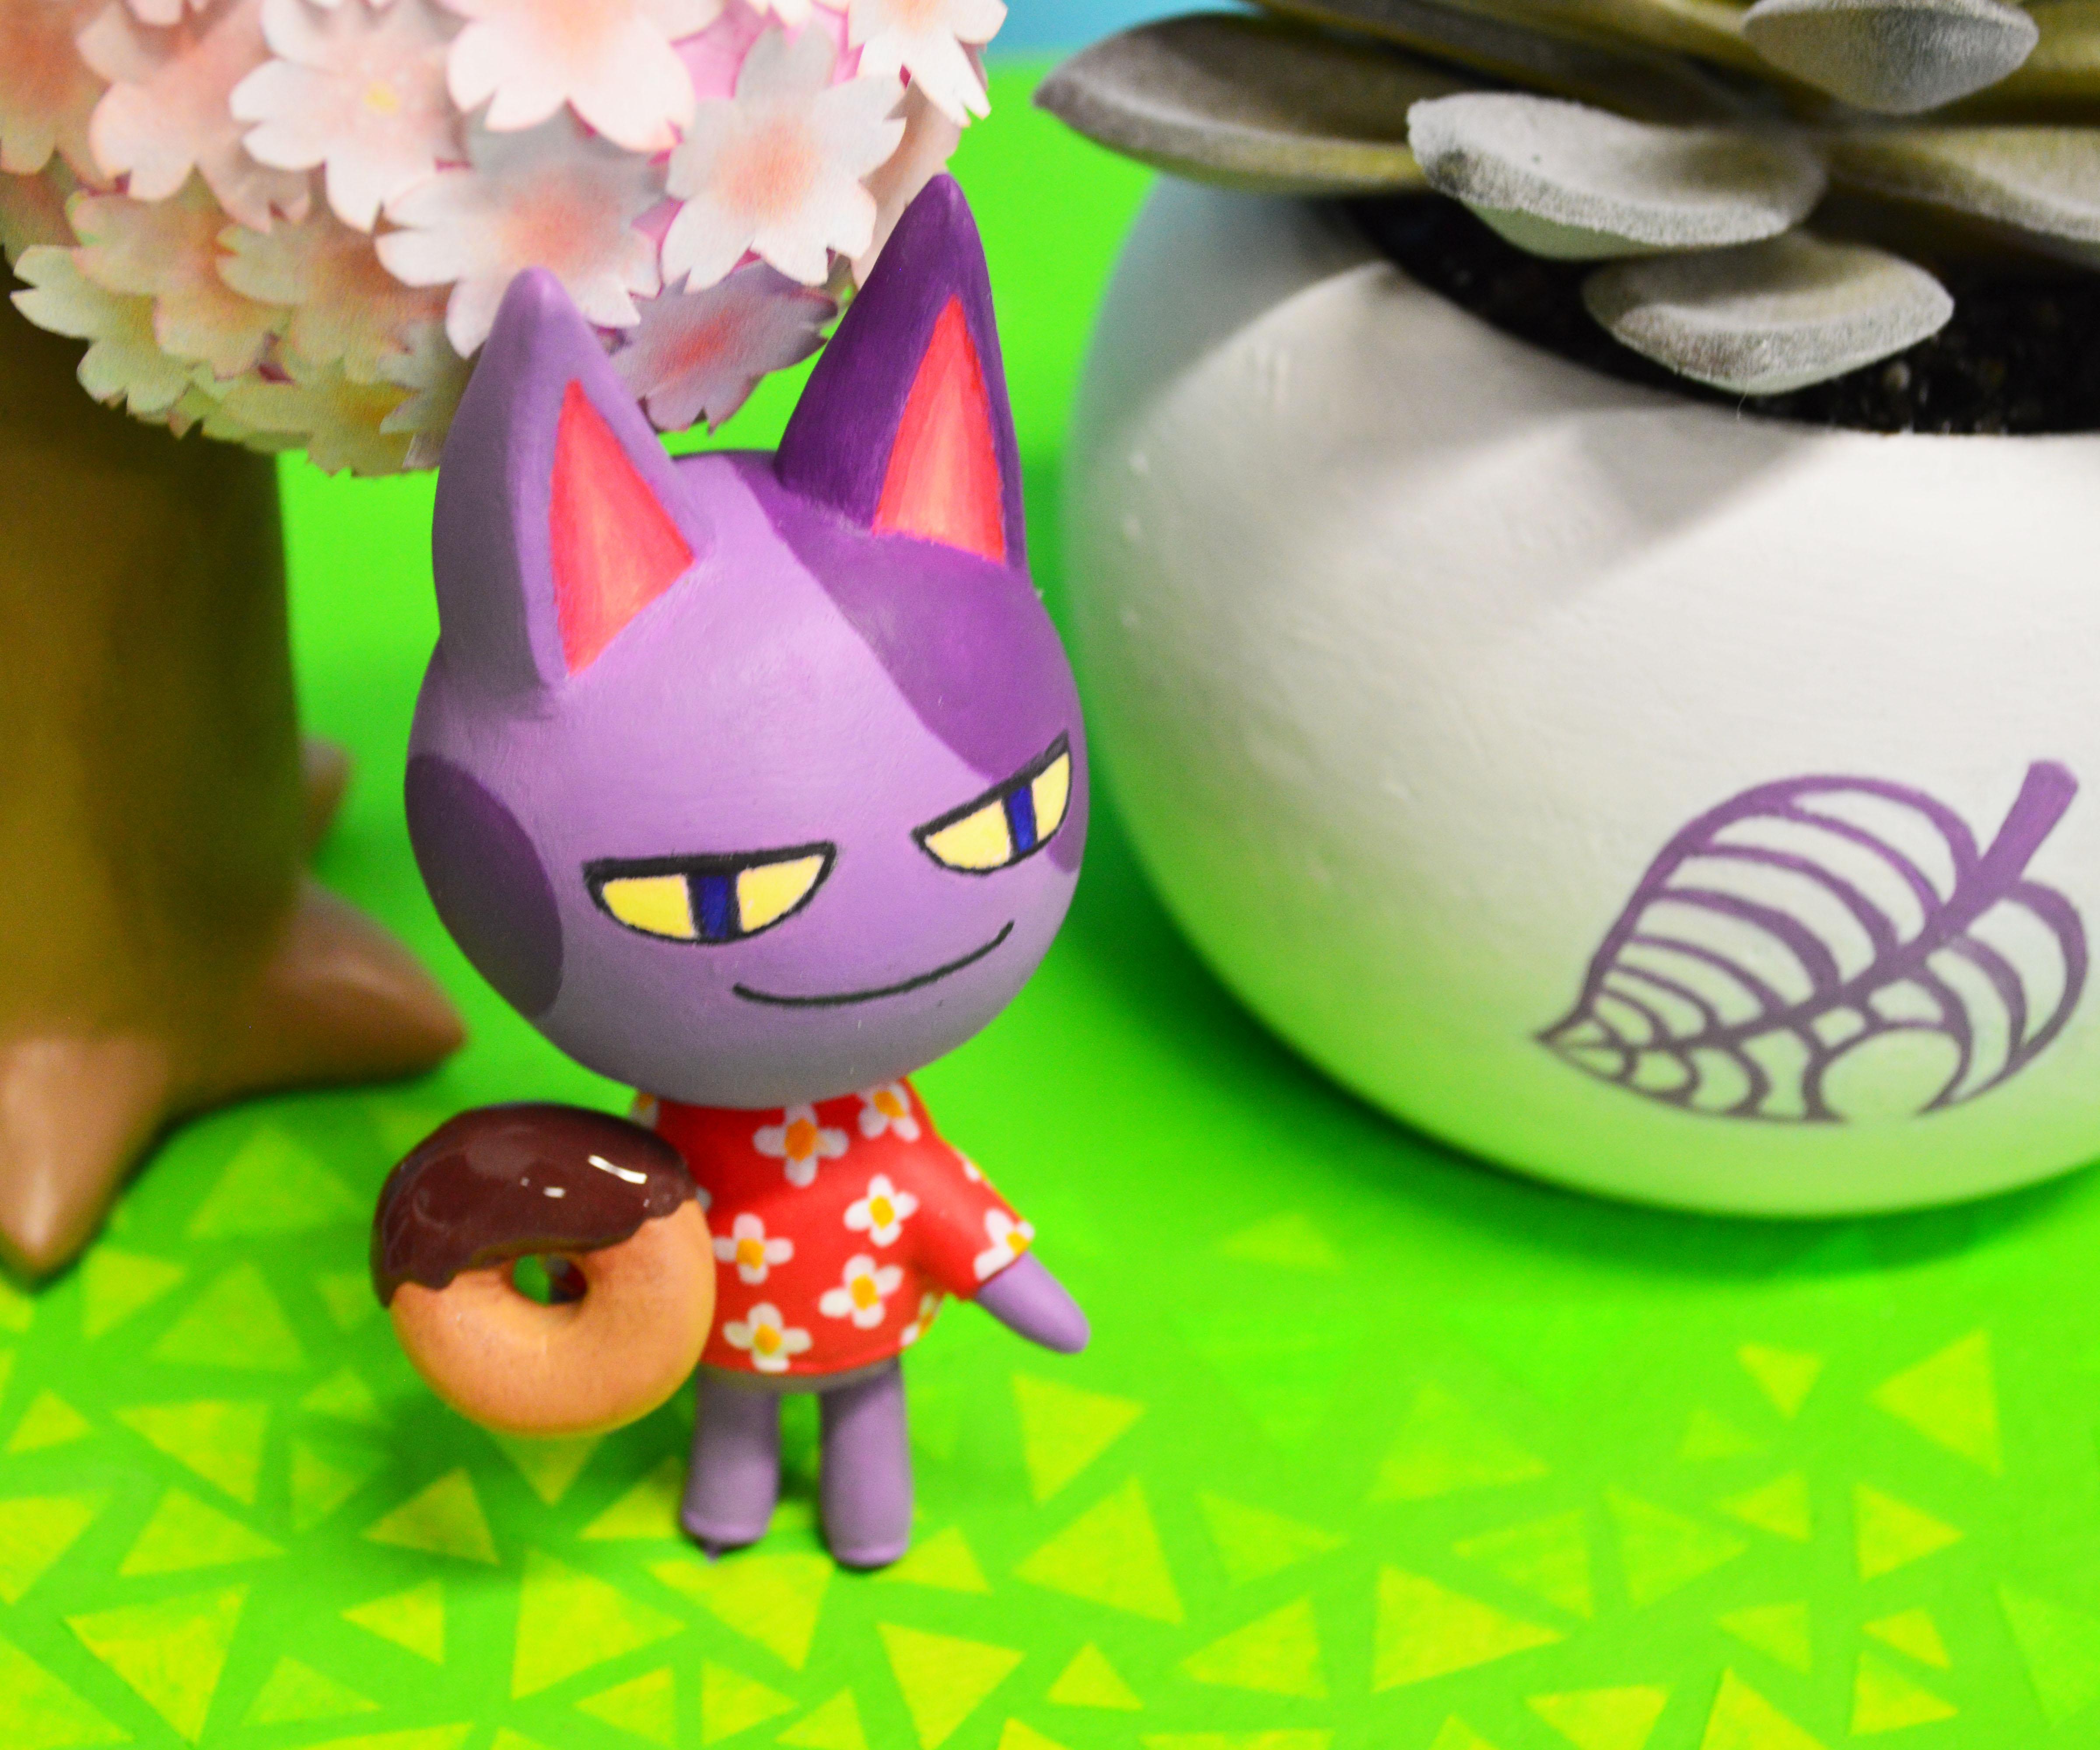 Sculpt an Animal Crossing Figure With Air Dry Clay : Bob the First Villager